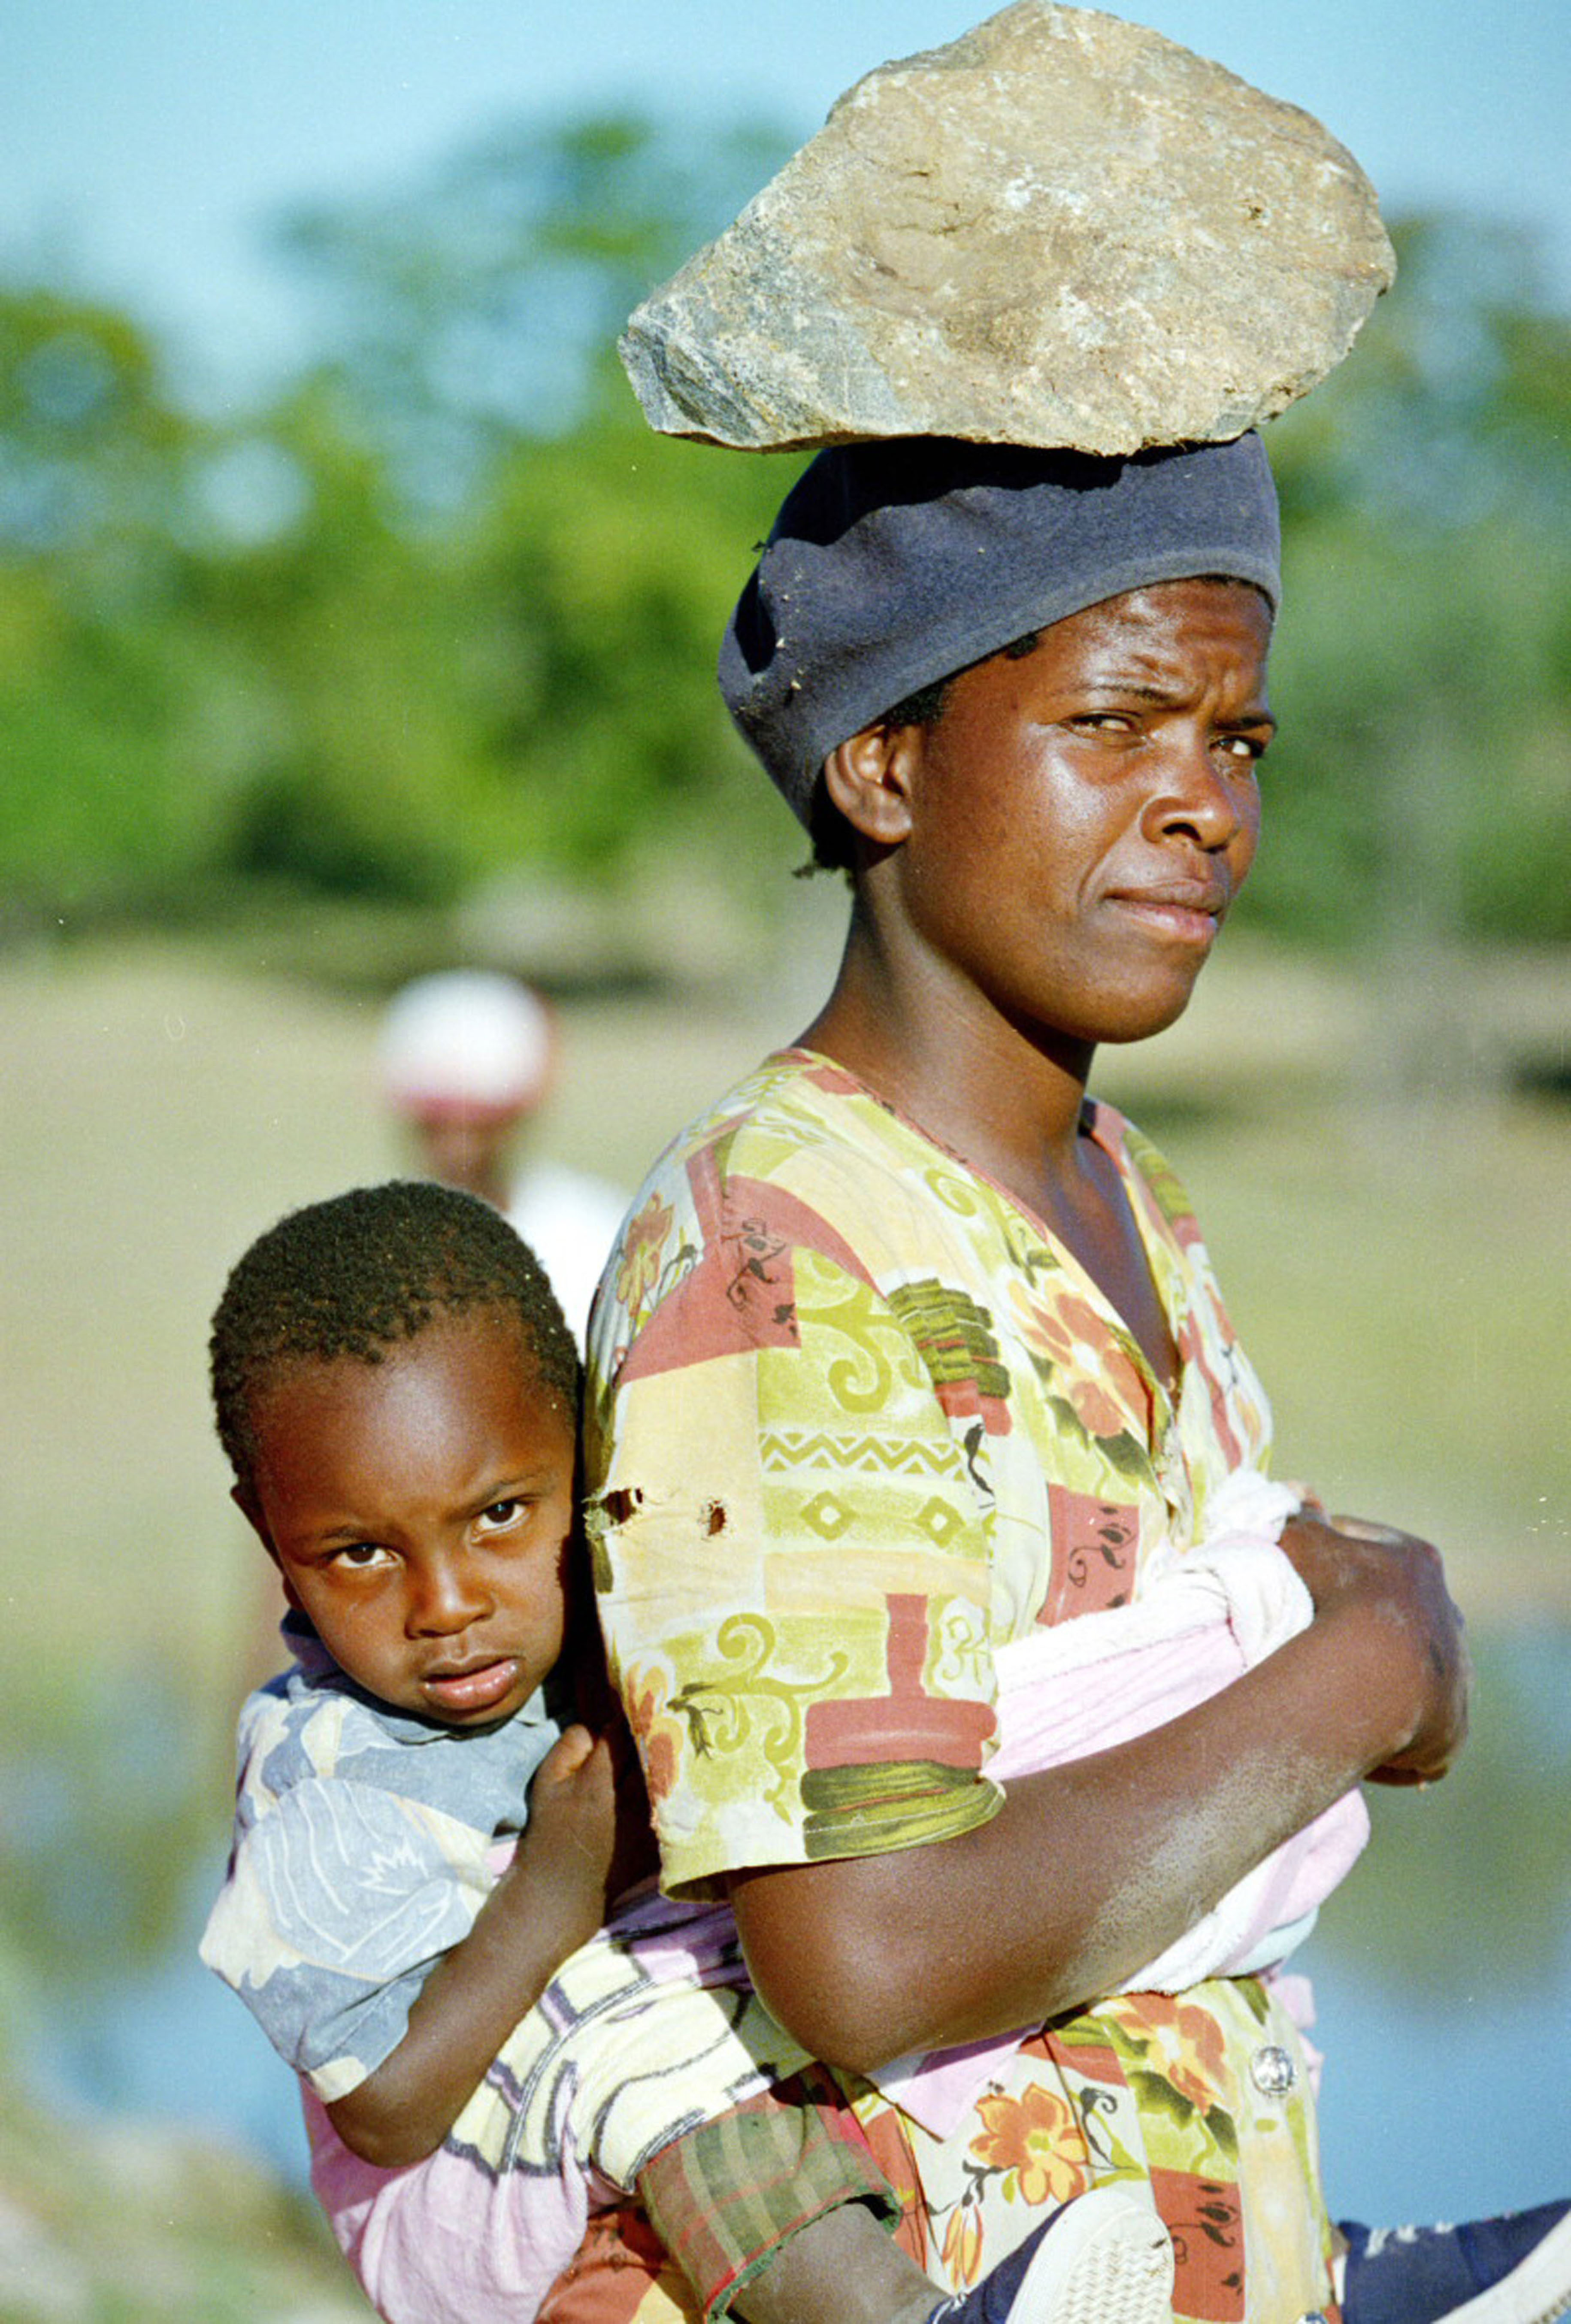 Voting Will Change the Lives of Zimbabwe’s Women | Inter Press Service